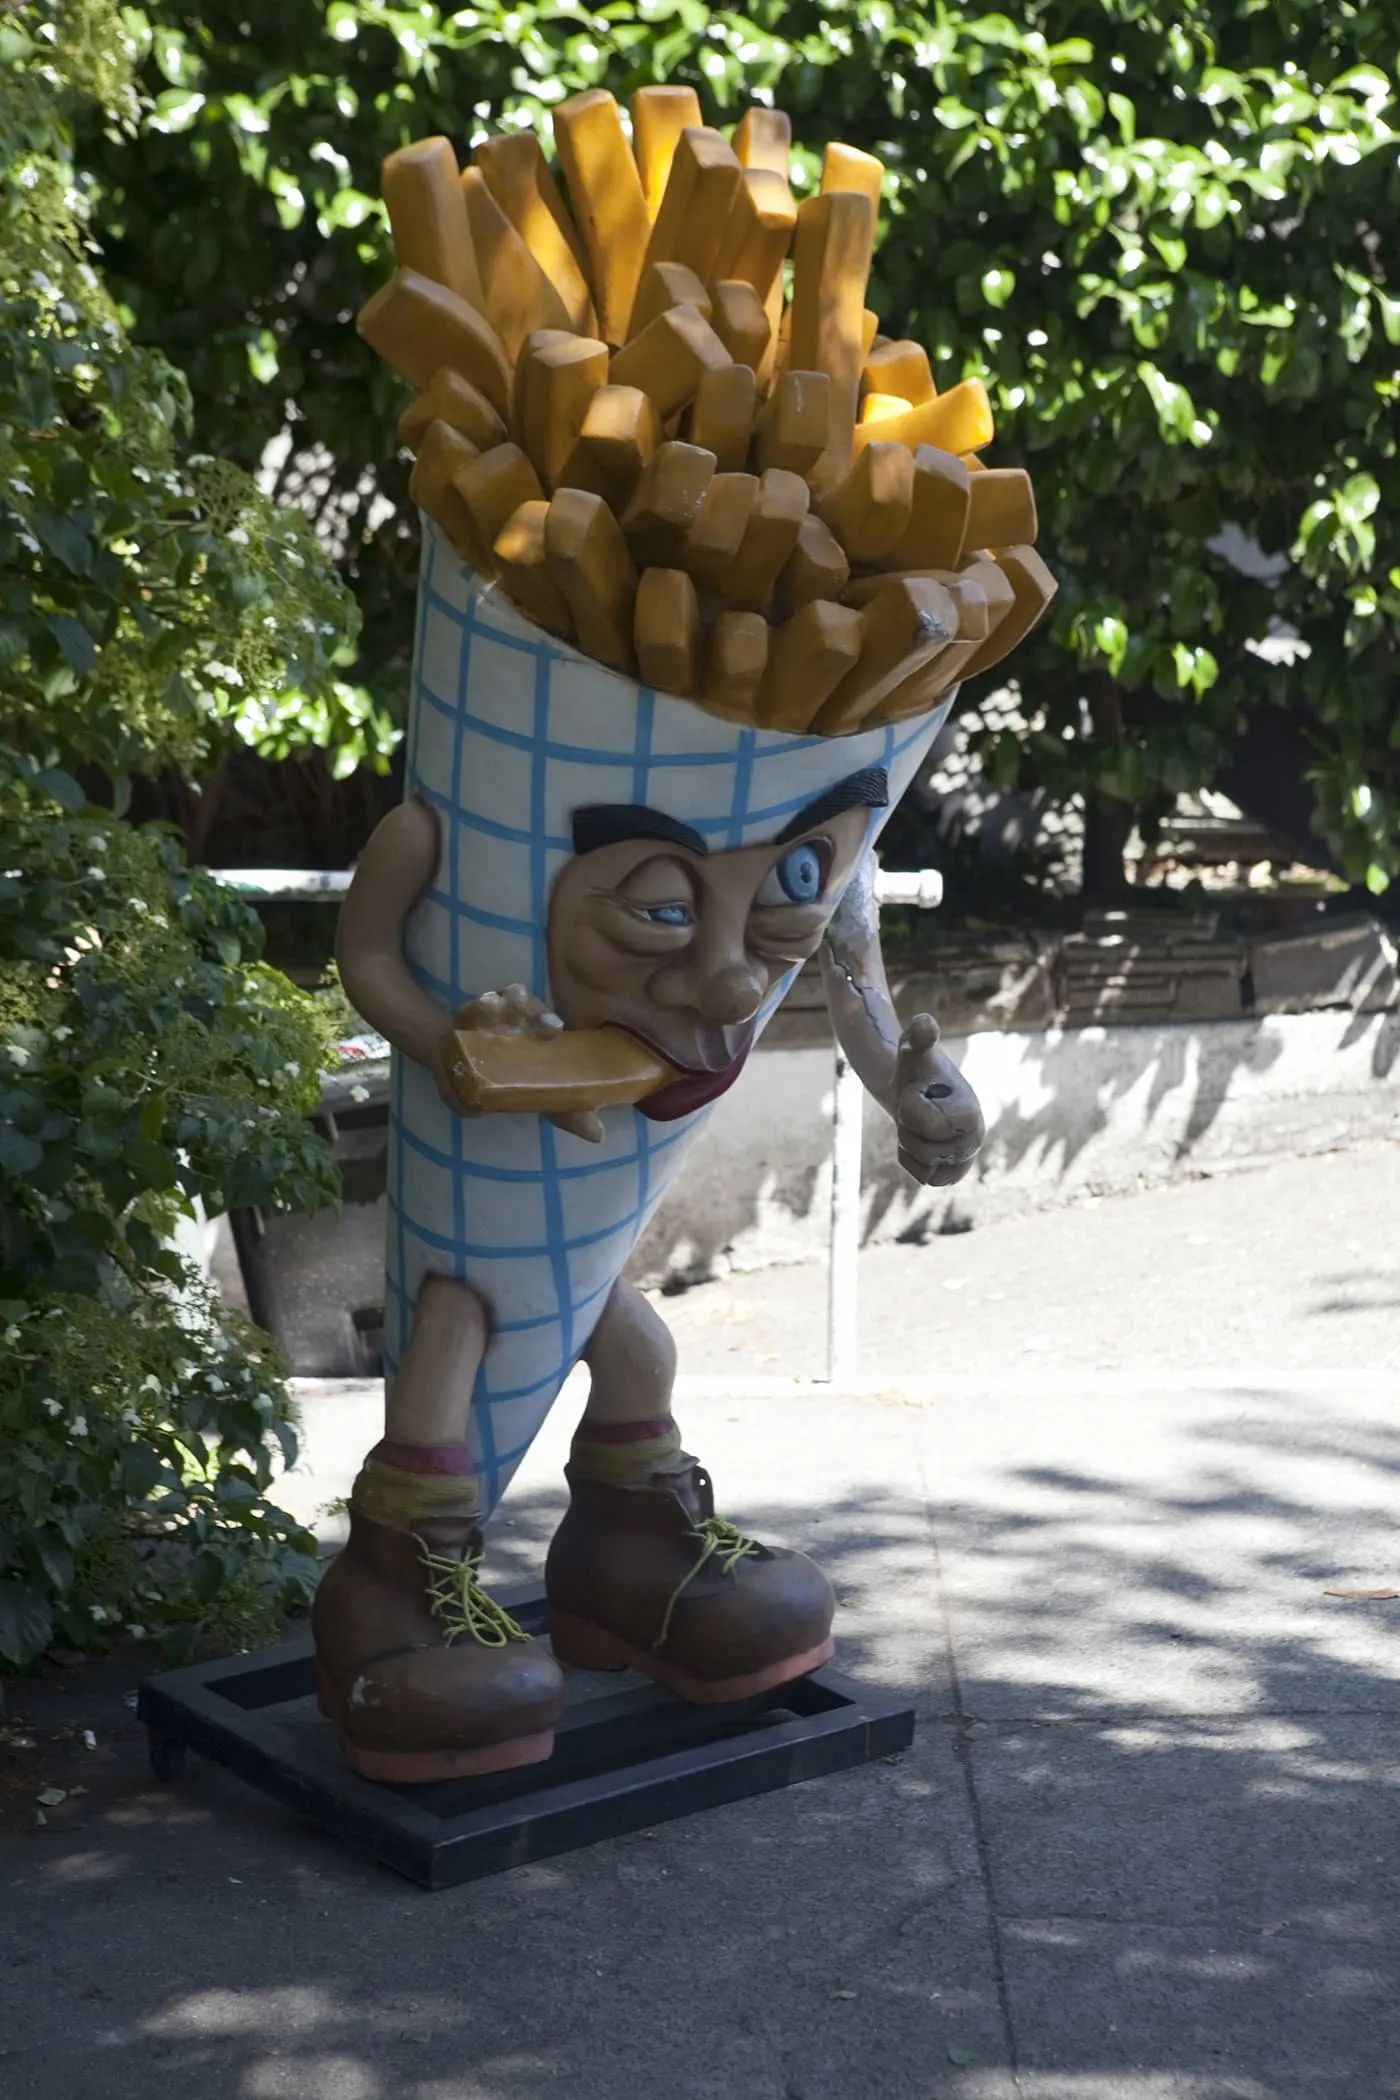 Deluxe Junk Fry Guy -  Giant cone of french fries eating a french fry outside of Deluxe Junk in Fremont, Seattle, Washington.